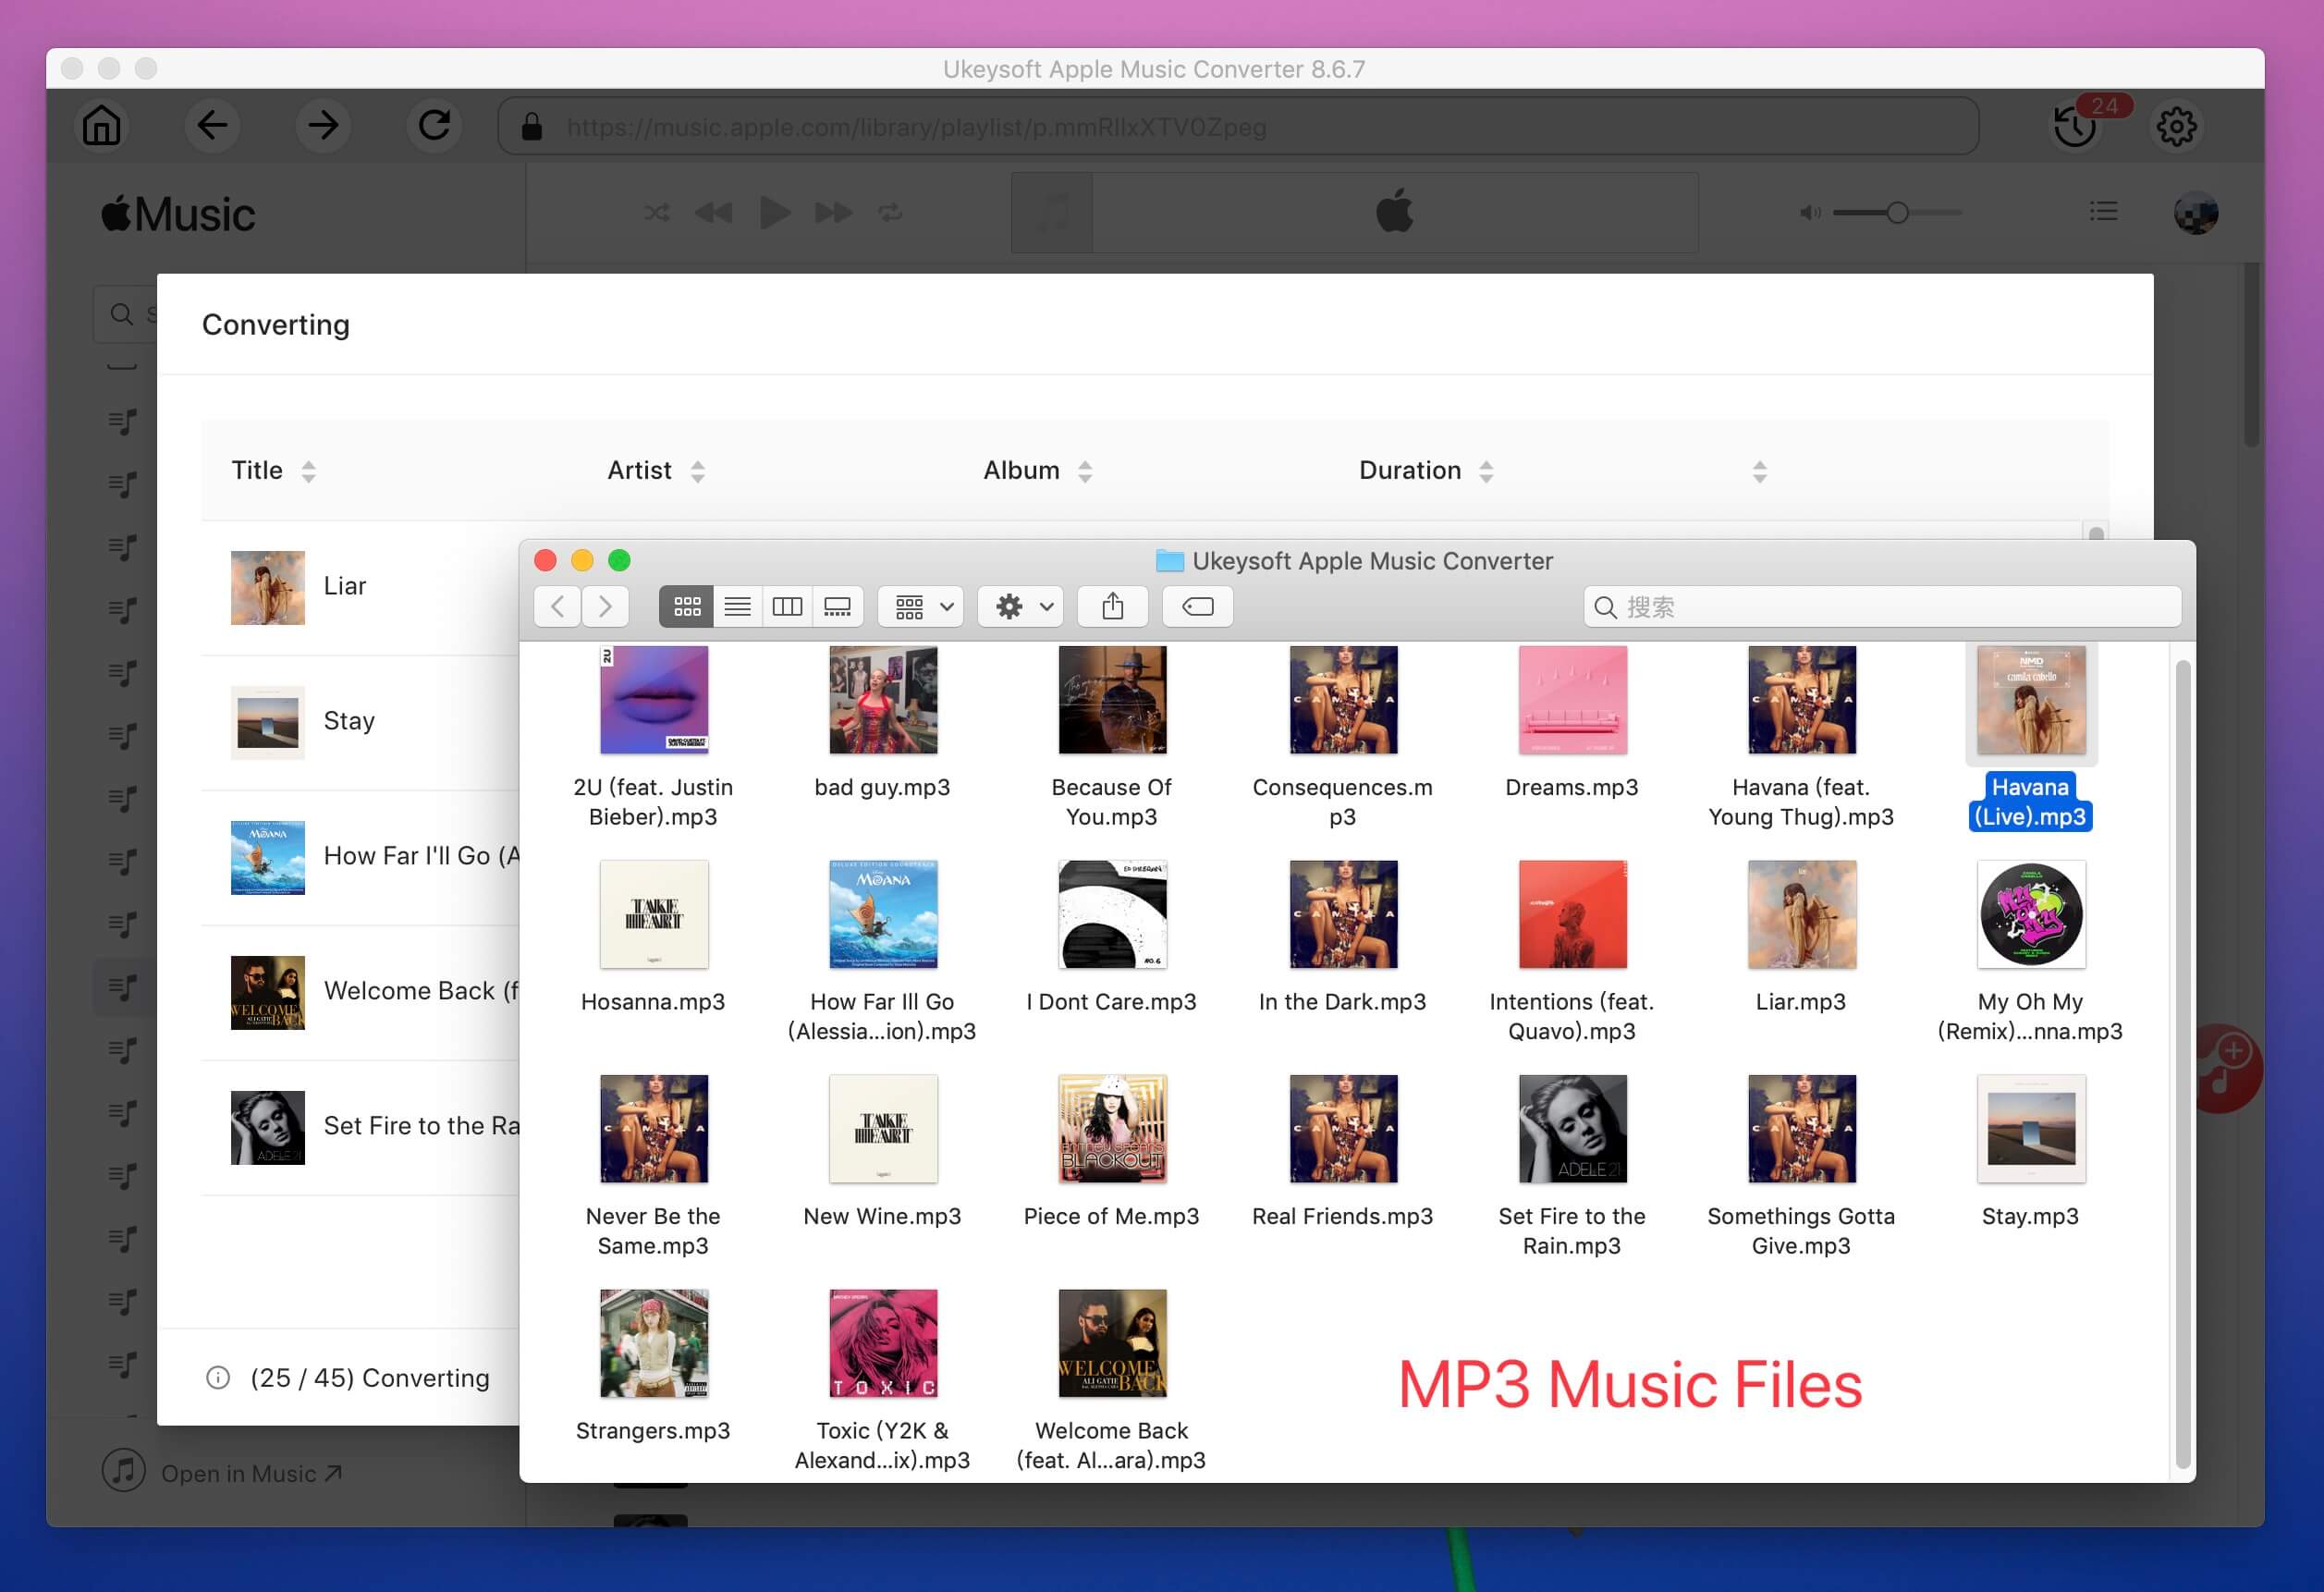 apple music in mp3 format